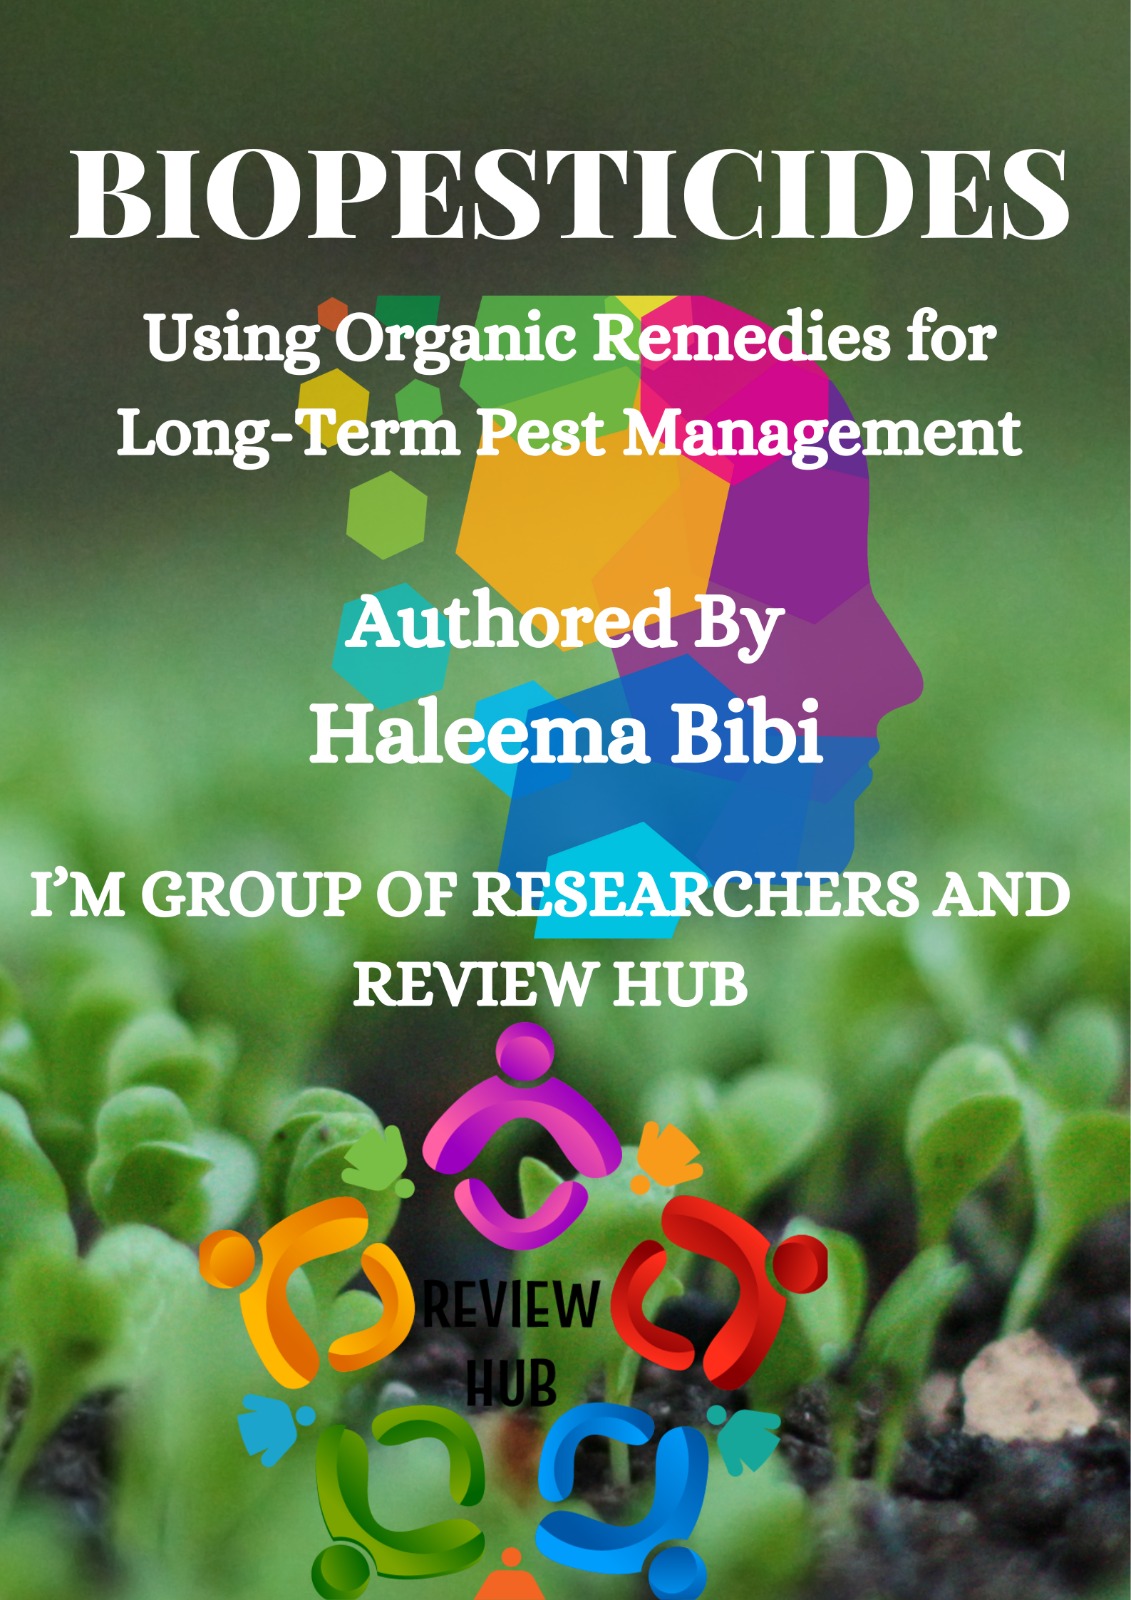 Biopesticides: Using Organic Remedies for Long-Term Pest Management